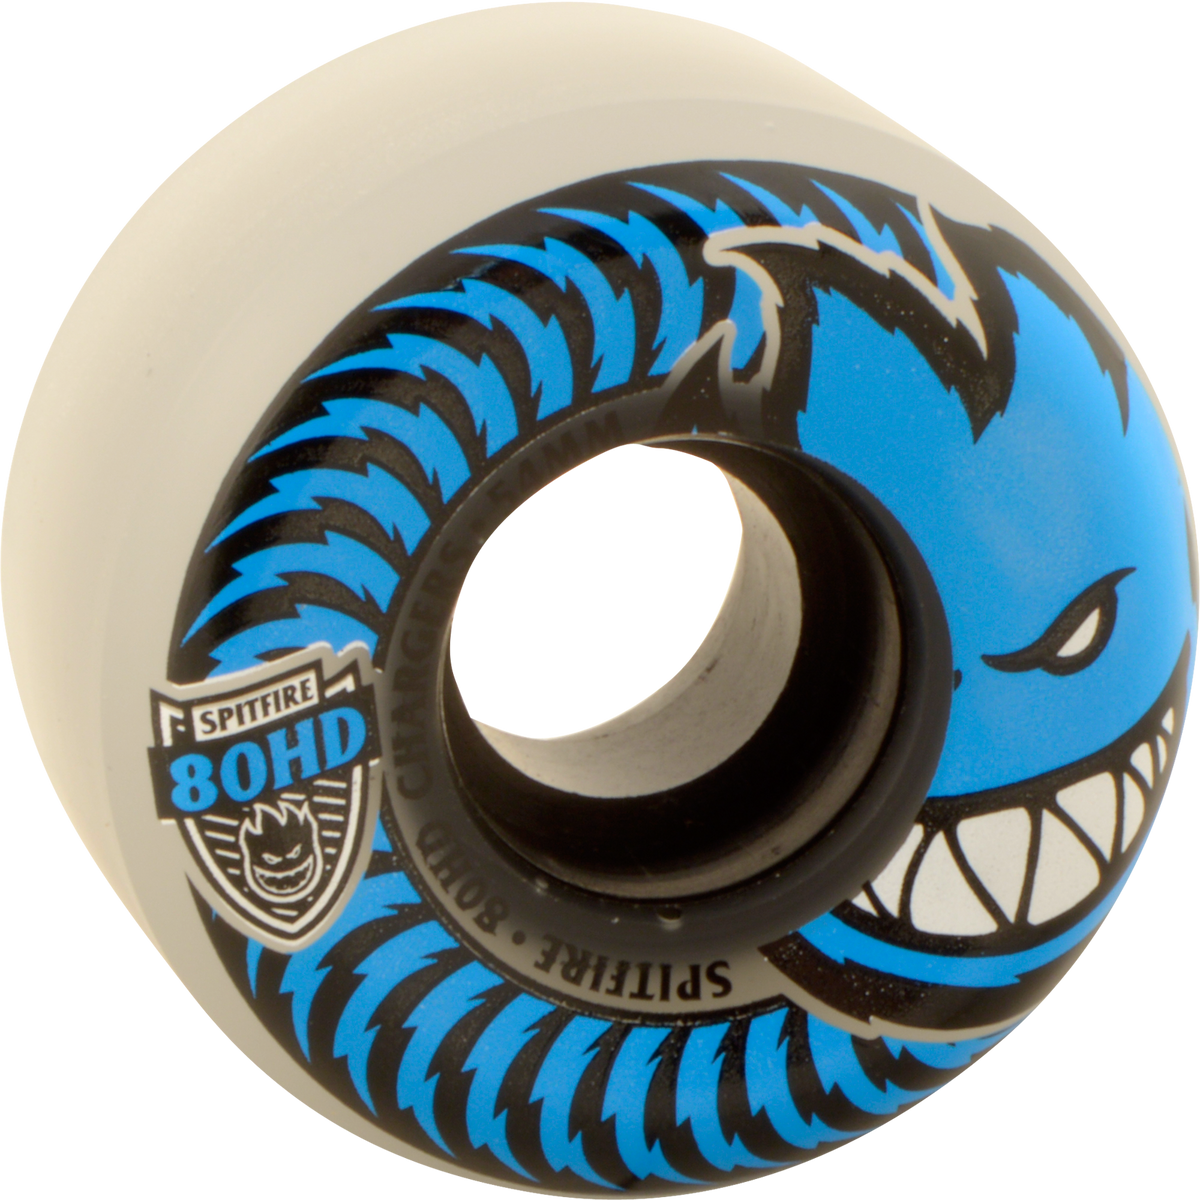 SPITFIRE // 80HD CHARGER CONICAL FULL 54mm CLEAR/BLUE